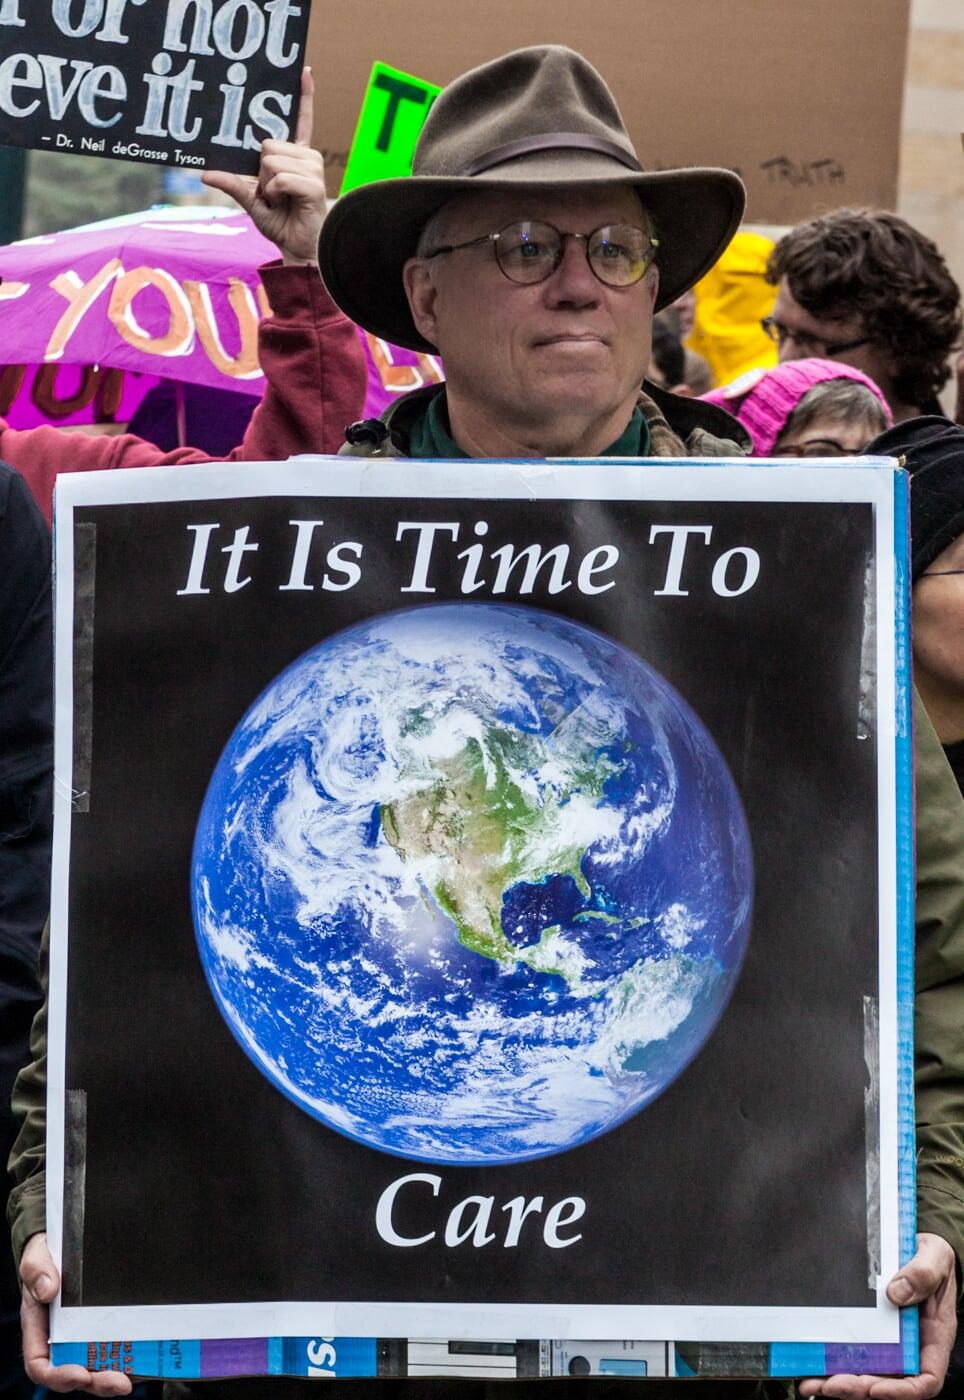 Scientists holding sign saying "It is time to care" with an image of the planet earth.